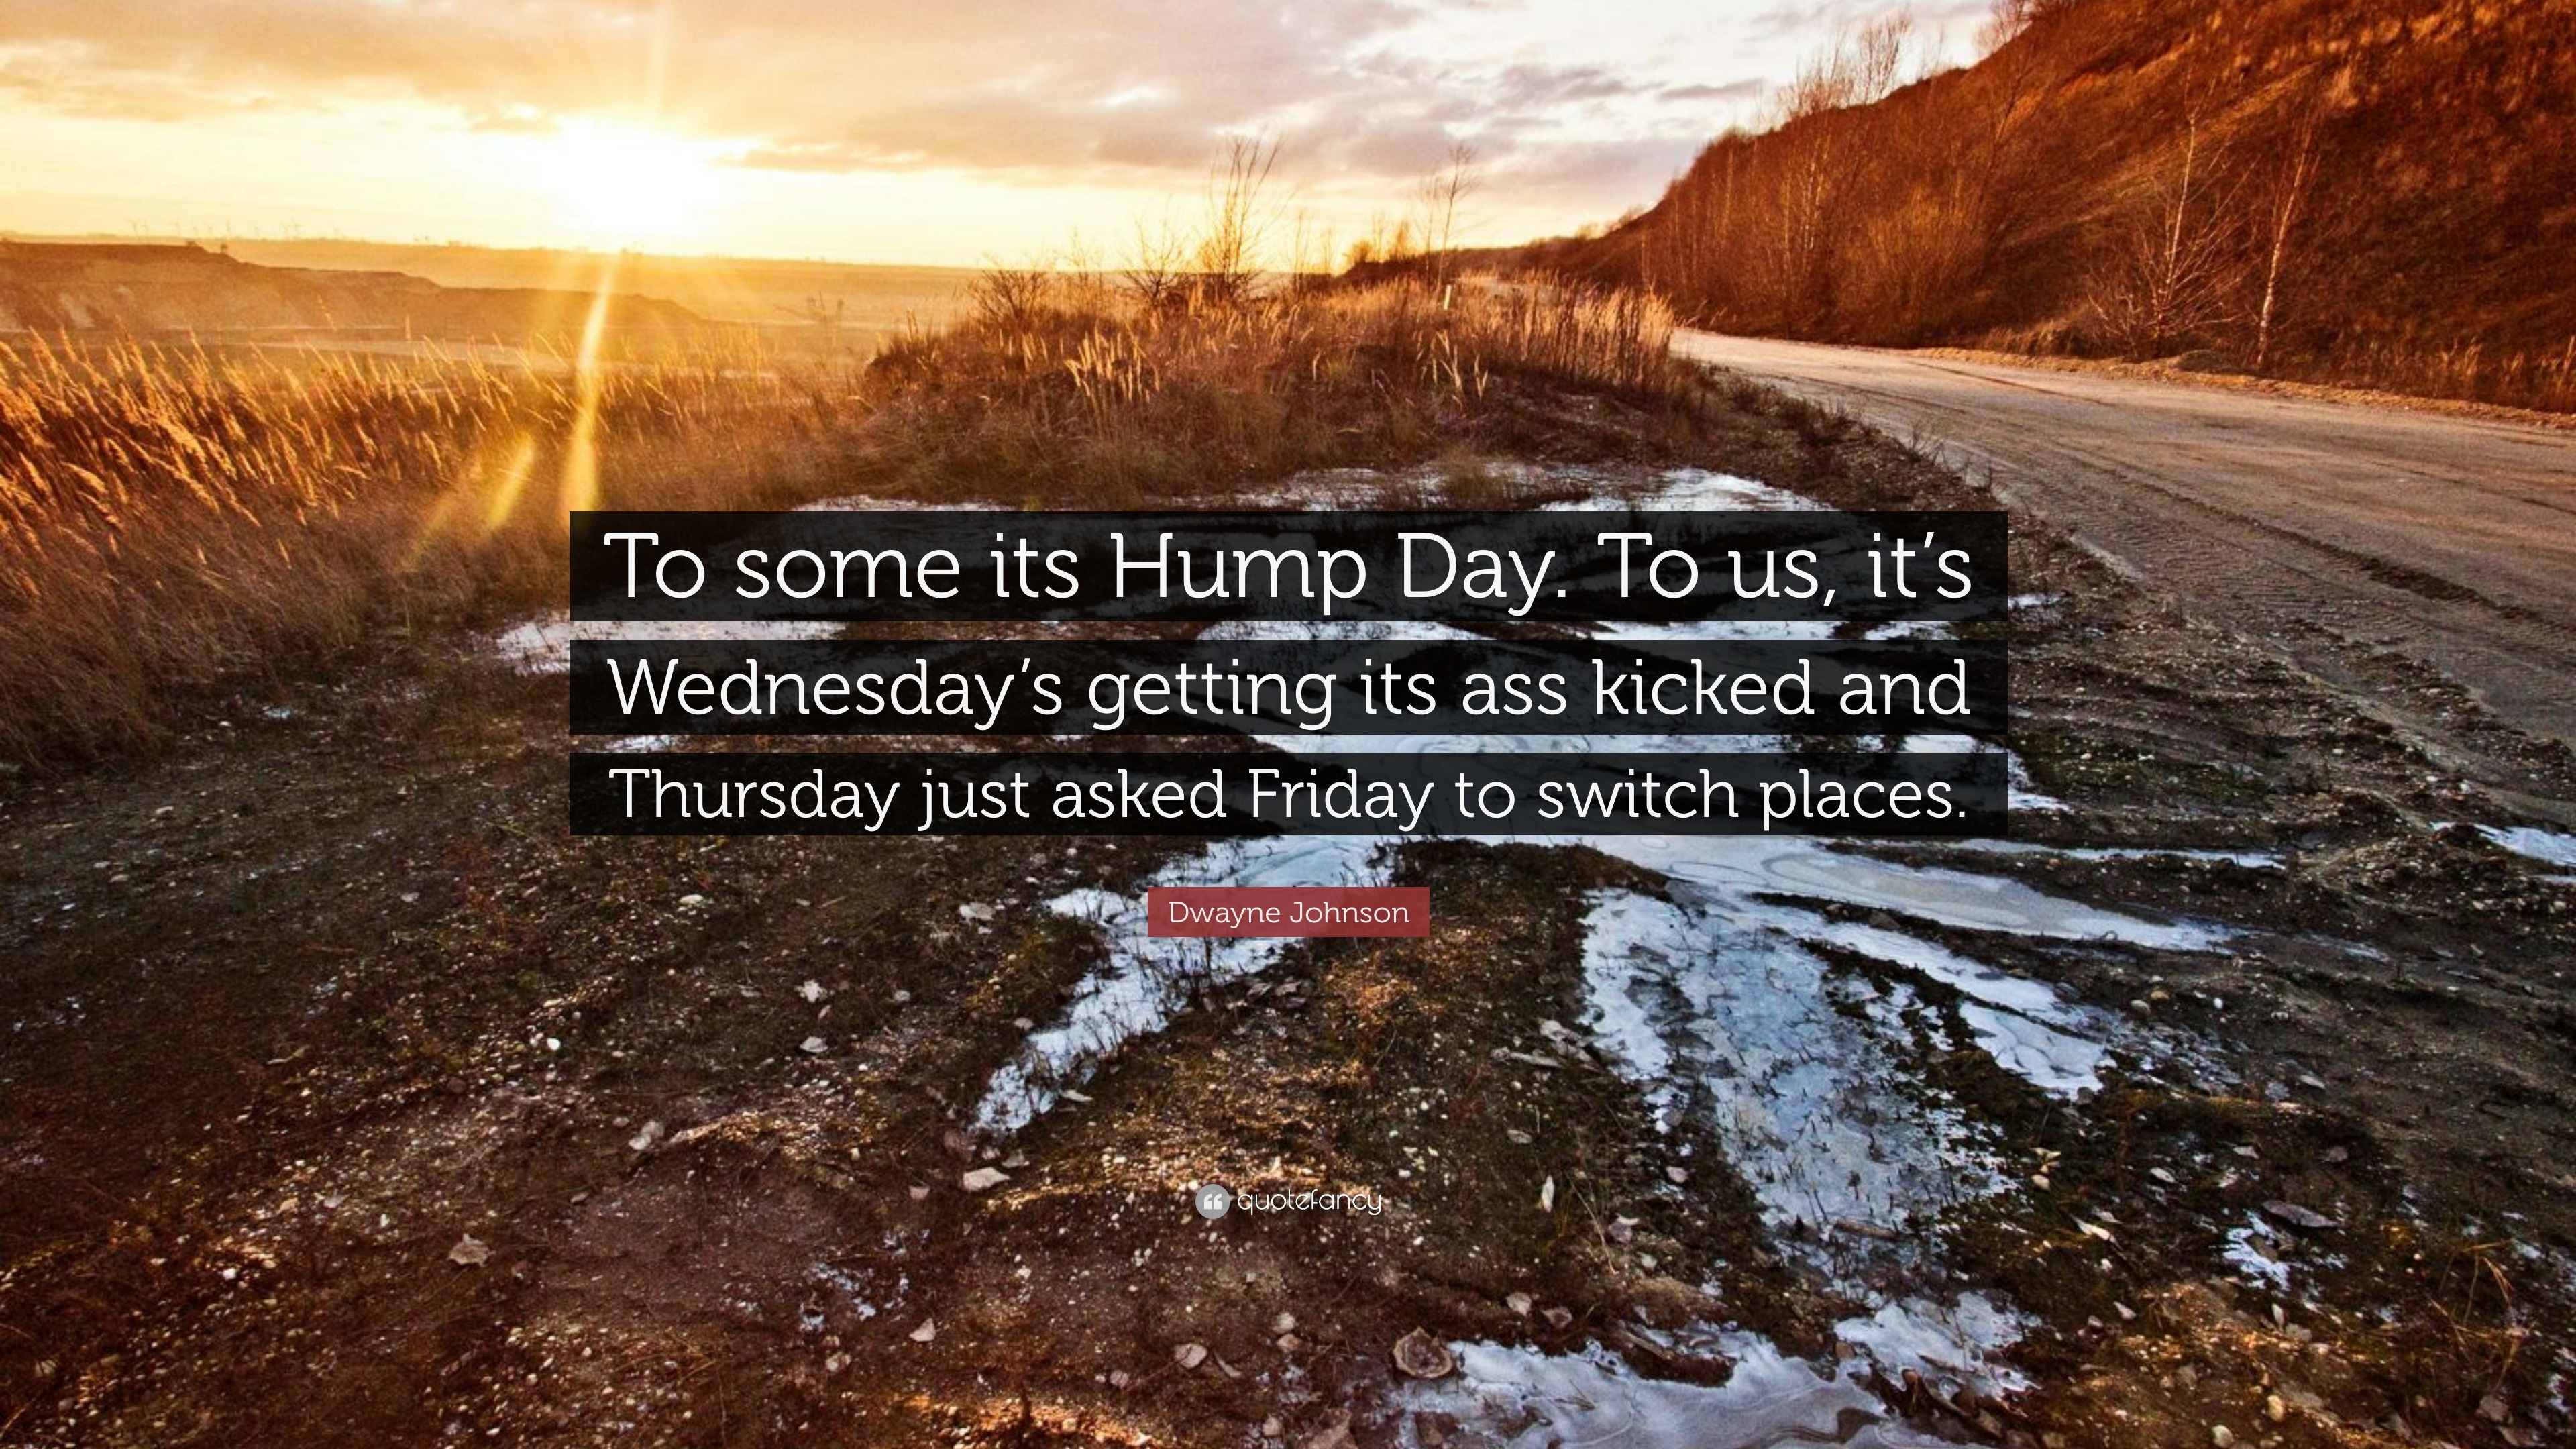 Dwayne Johnson Quote: “To some its Hump Day. To us, it's